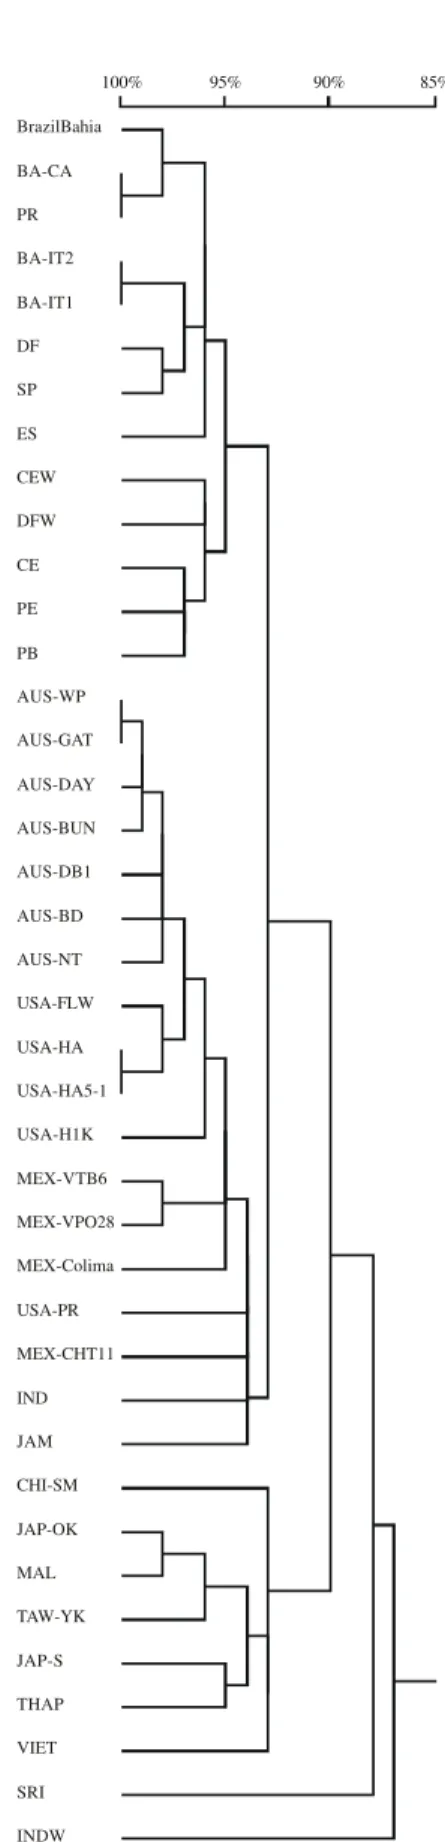 FIG. 1 - Homology tree for the  cp gene from 13  Papaya ringspot virus (PRSV) Brazilian isolates and 27 additional isolates from diverse world locations.